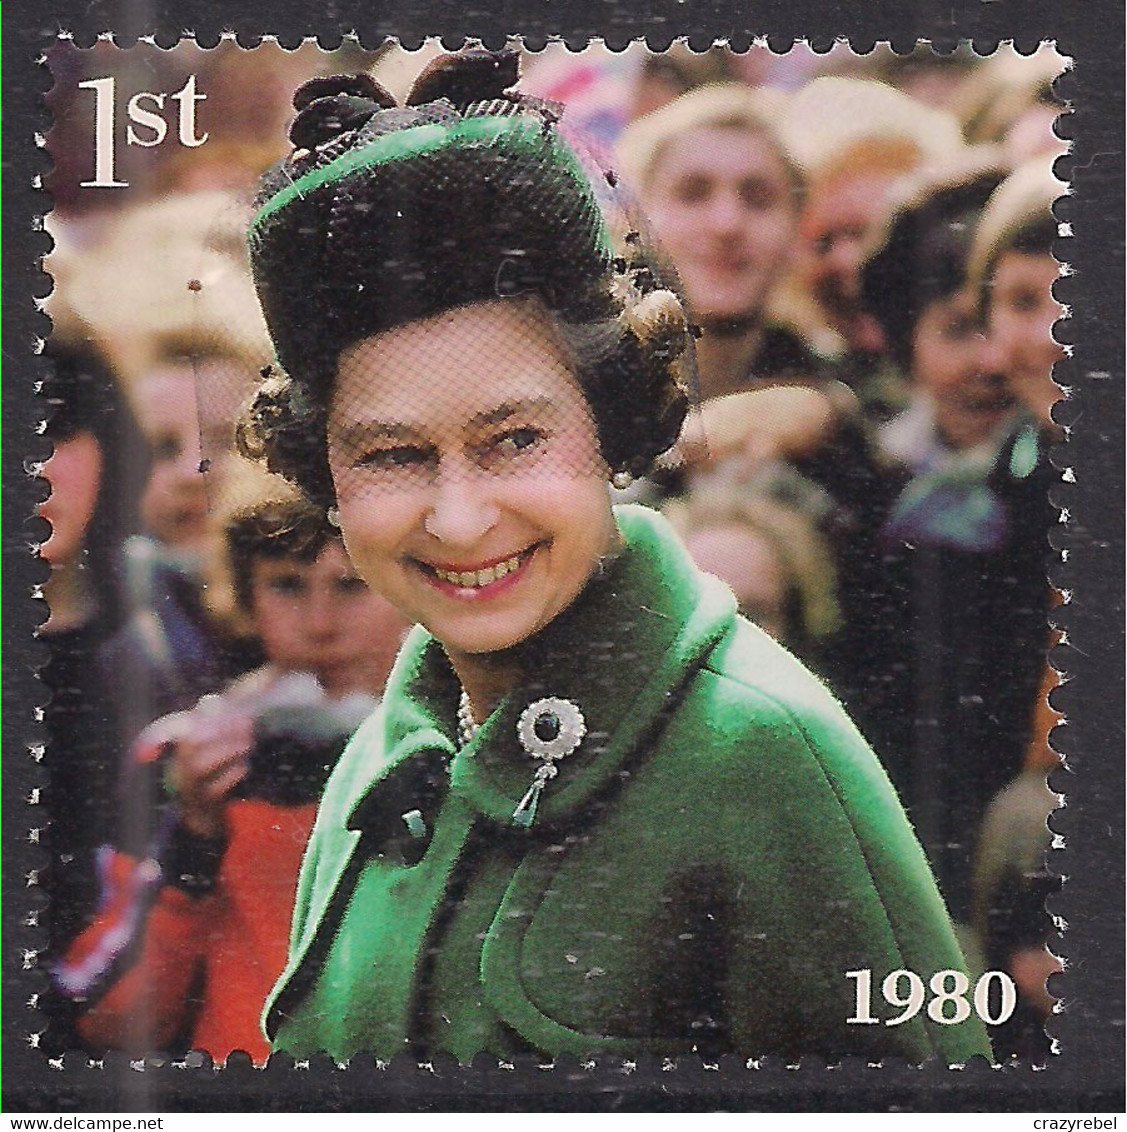 GB 2022 QE2 1st Her Majesty The Queens Platinum Jubilee Umm  SG 4629 ( R780 ) - Unused Stamps